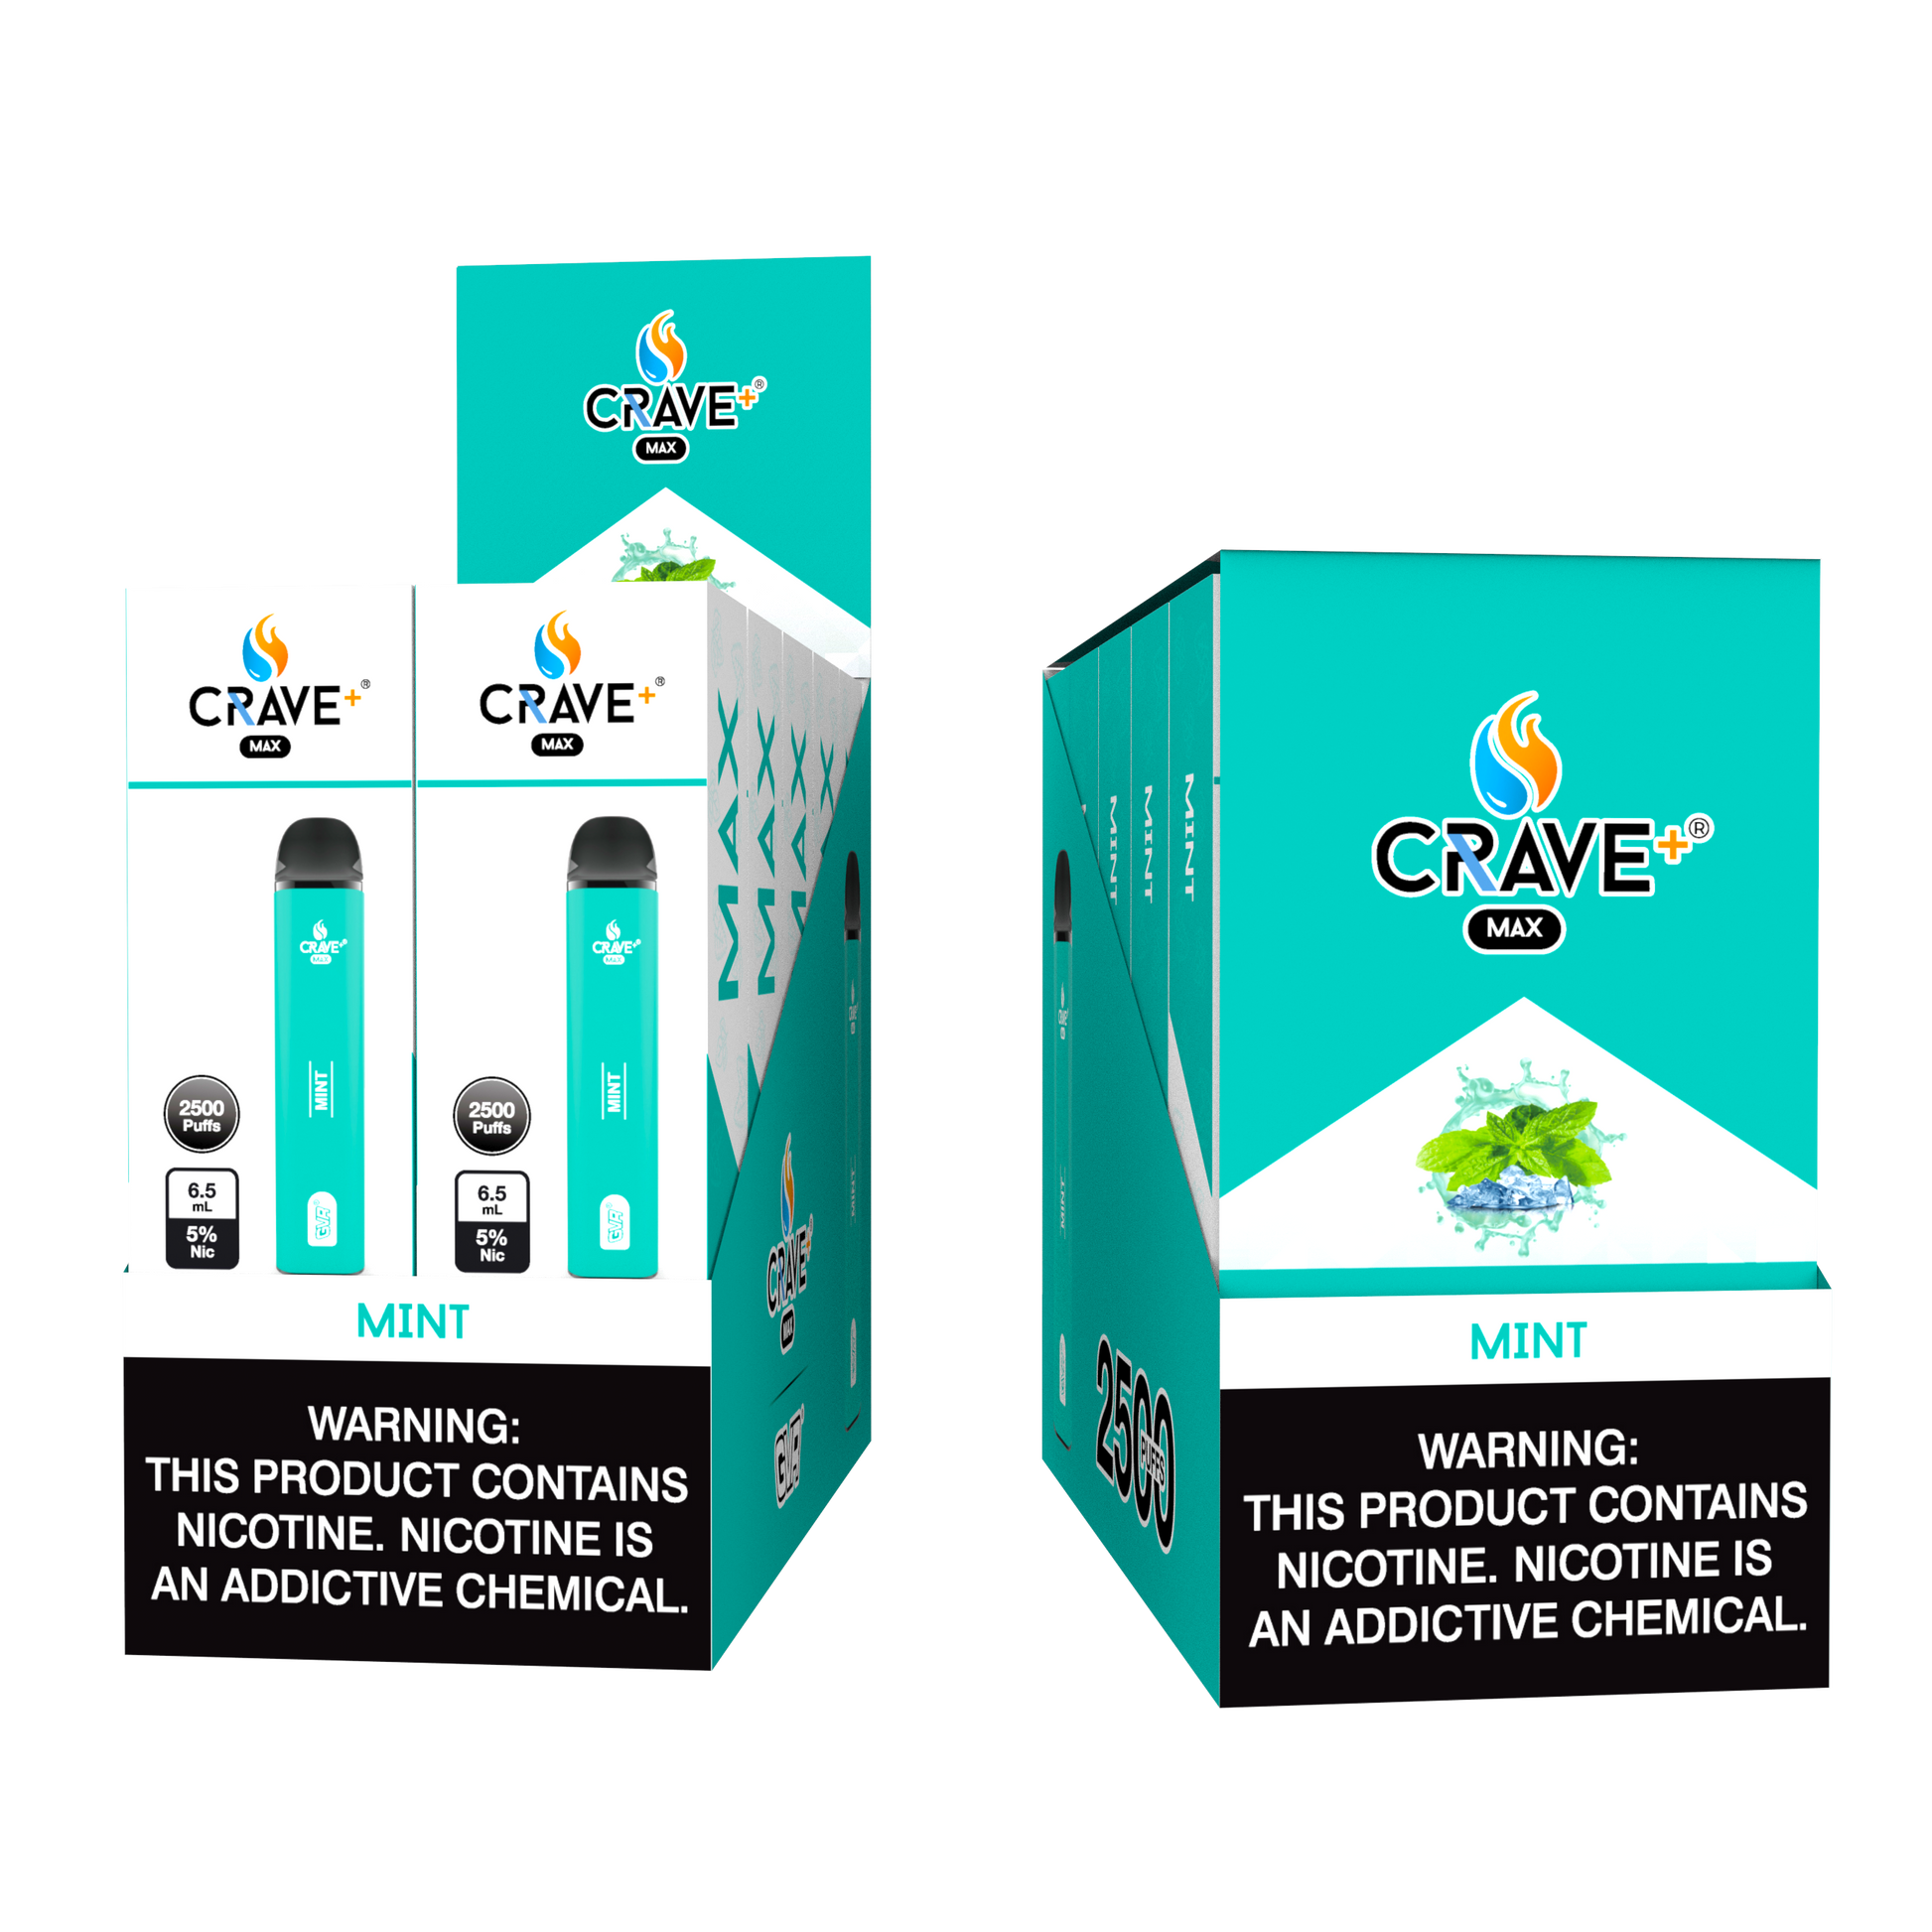 crave max, crave vape, buy crave max, crave max for sale, crave max flavors, crave flavors vape, buy crave vape online, crave max gvr, crave 2500 puffs, crave clear, crave max clear, crave clear 3%, crave clear 5%, crave max 3%, crave max 5%, crave 3%, crave 5%, crave vape clear, vape clear flavor, crave flavor clear, crave max mint, crave mint, crave max mint flavor, crave mint flavor, crave max disposable 2500 puffs, crave max bulk, crave disposable bulk, crave max mint, crave max disposable